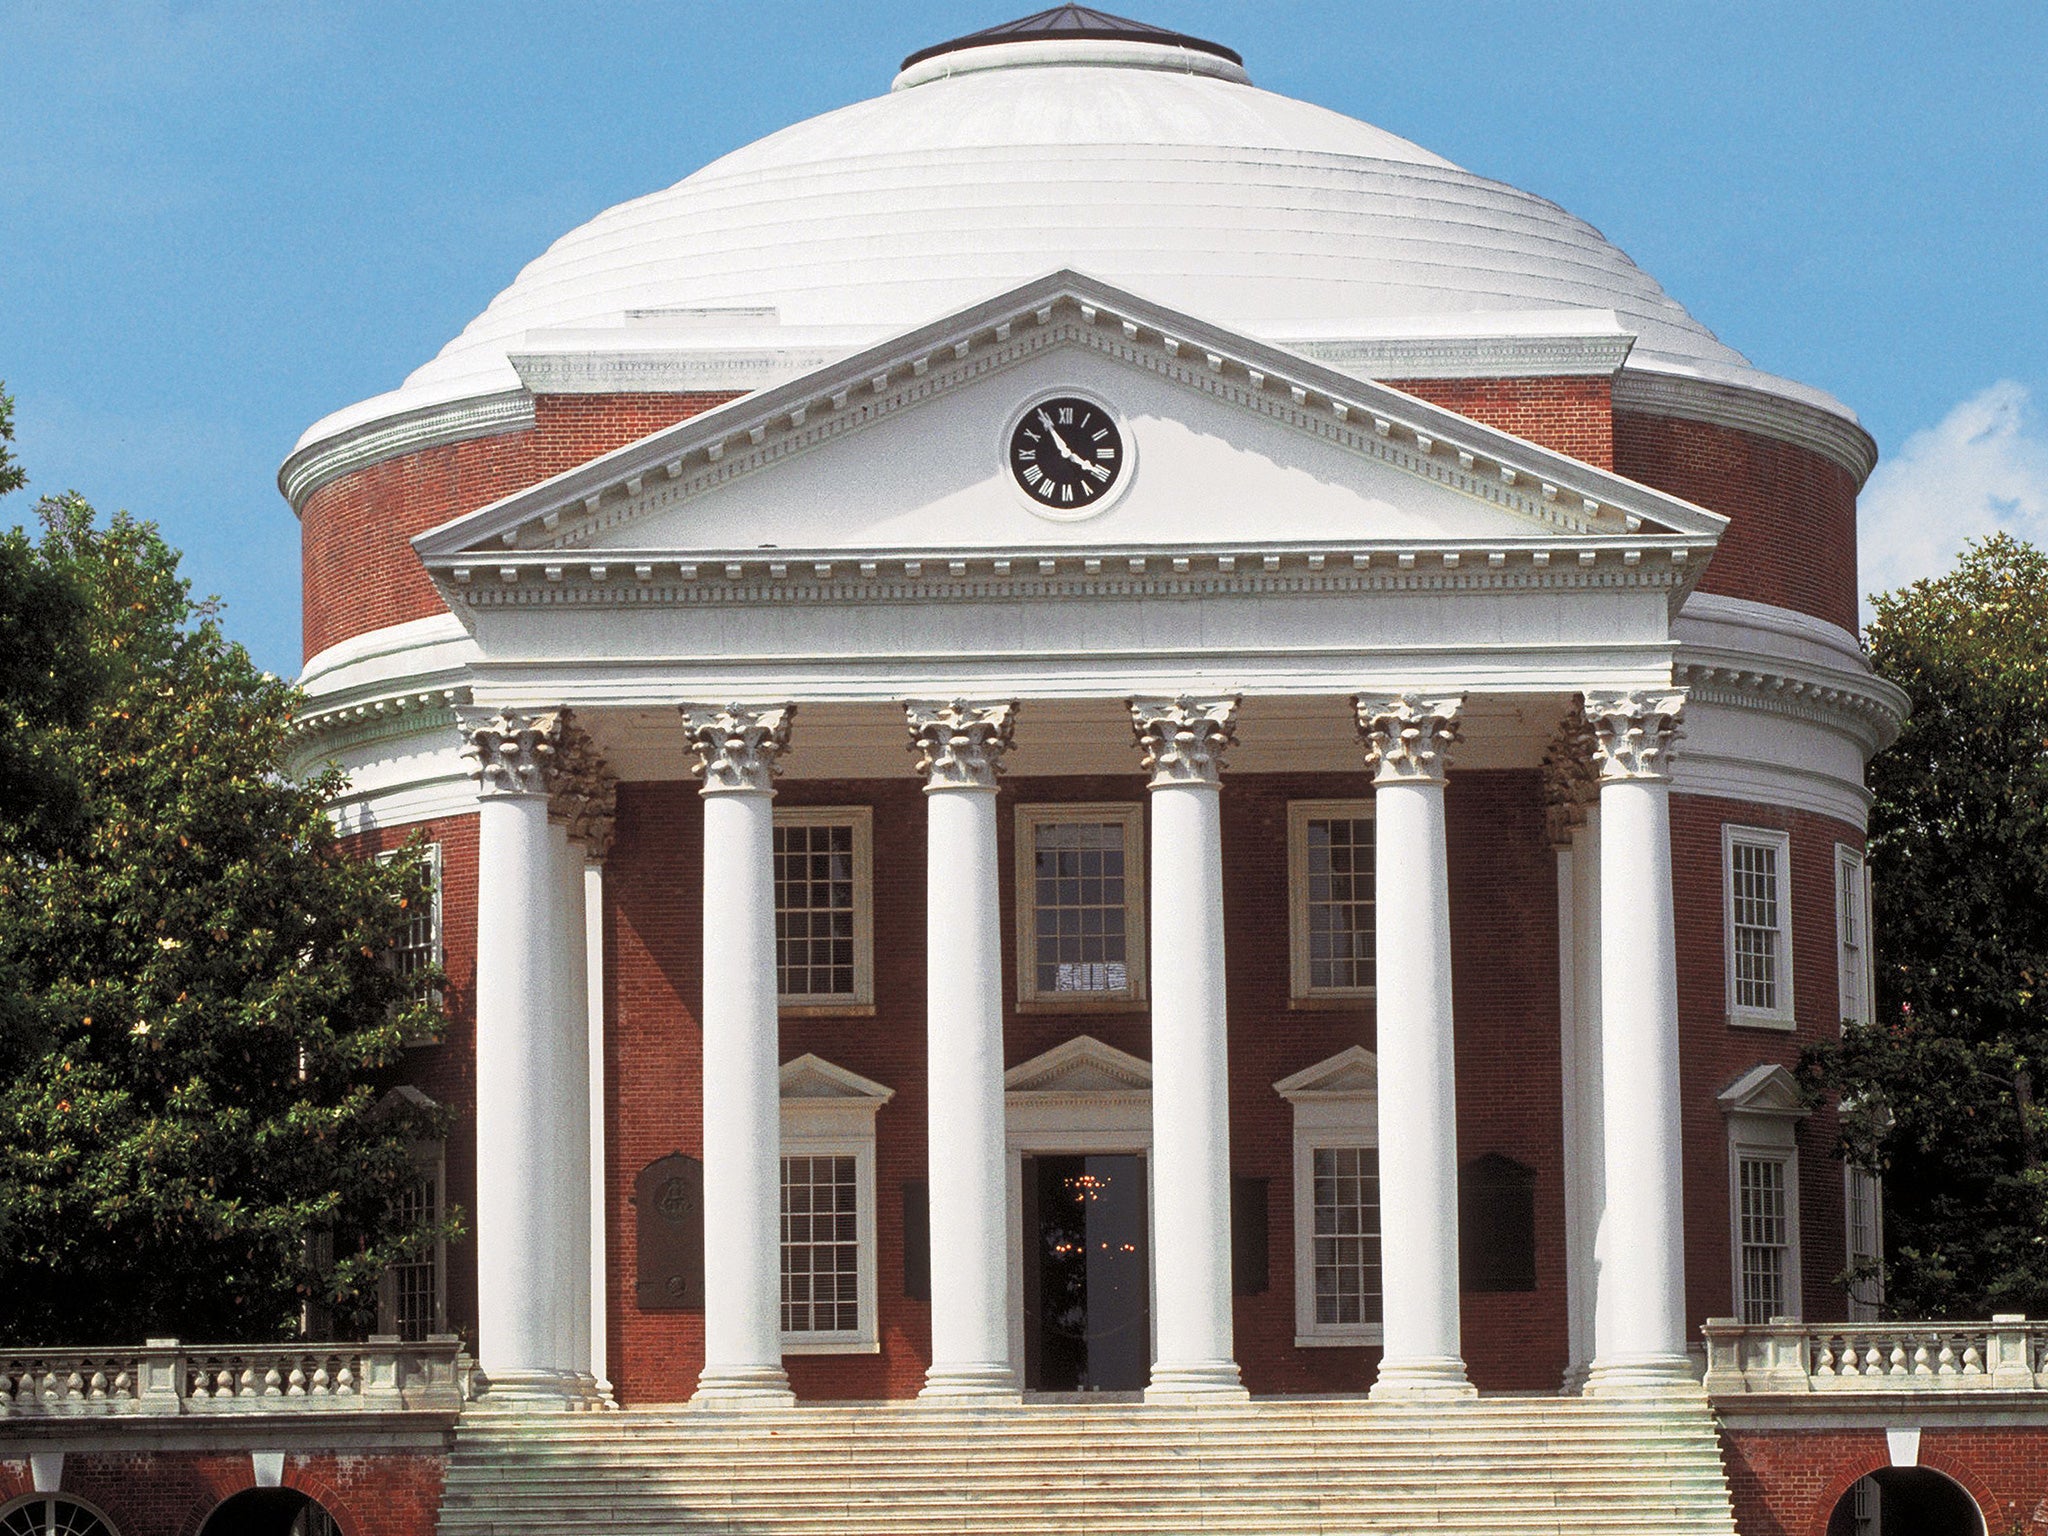 The Rotunda building at the University of Virginia in Charlottesville, by Jefferson Thomas